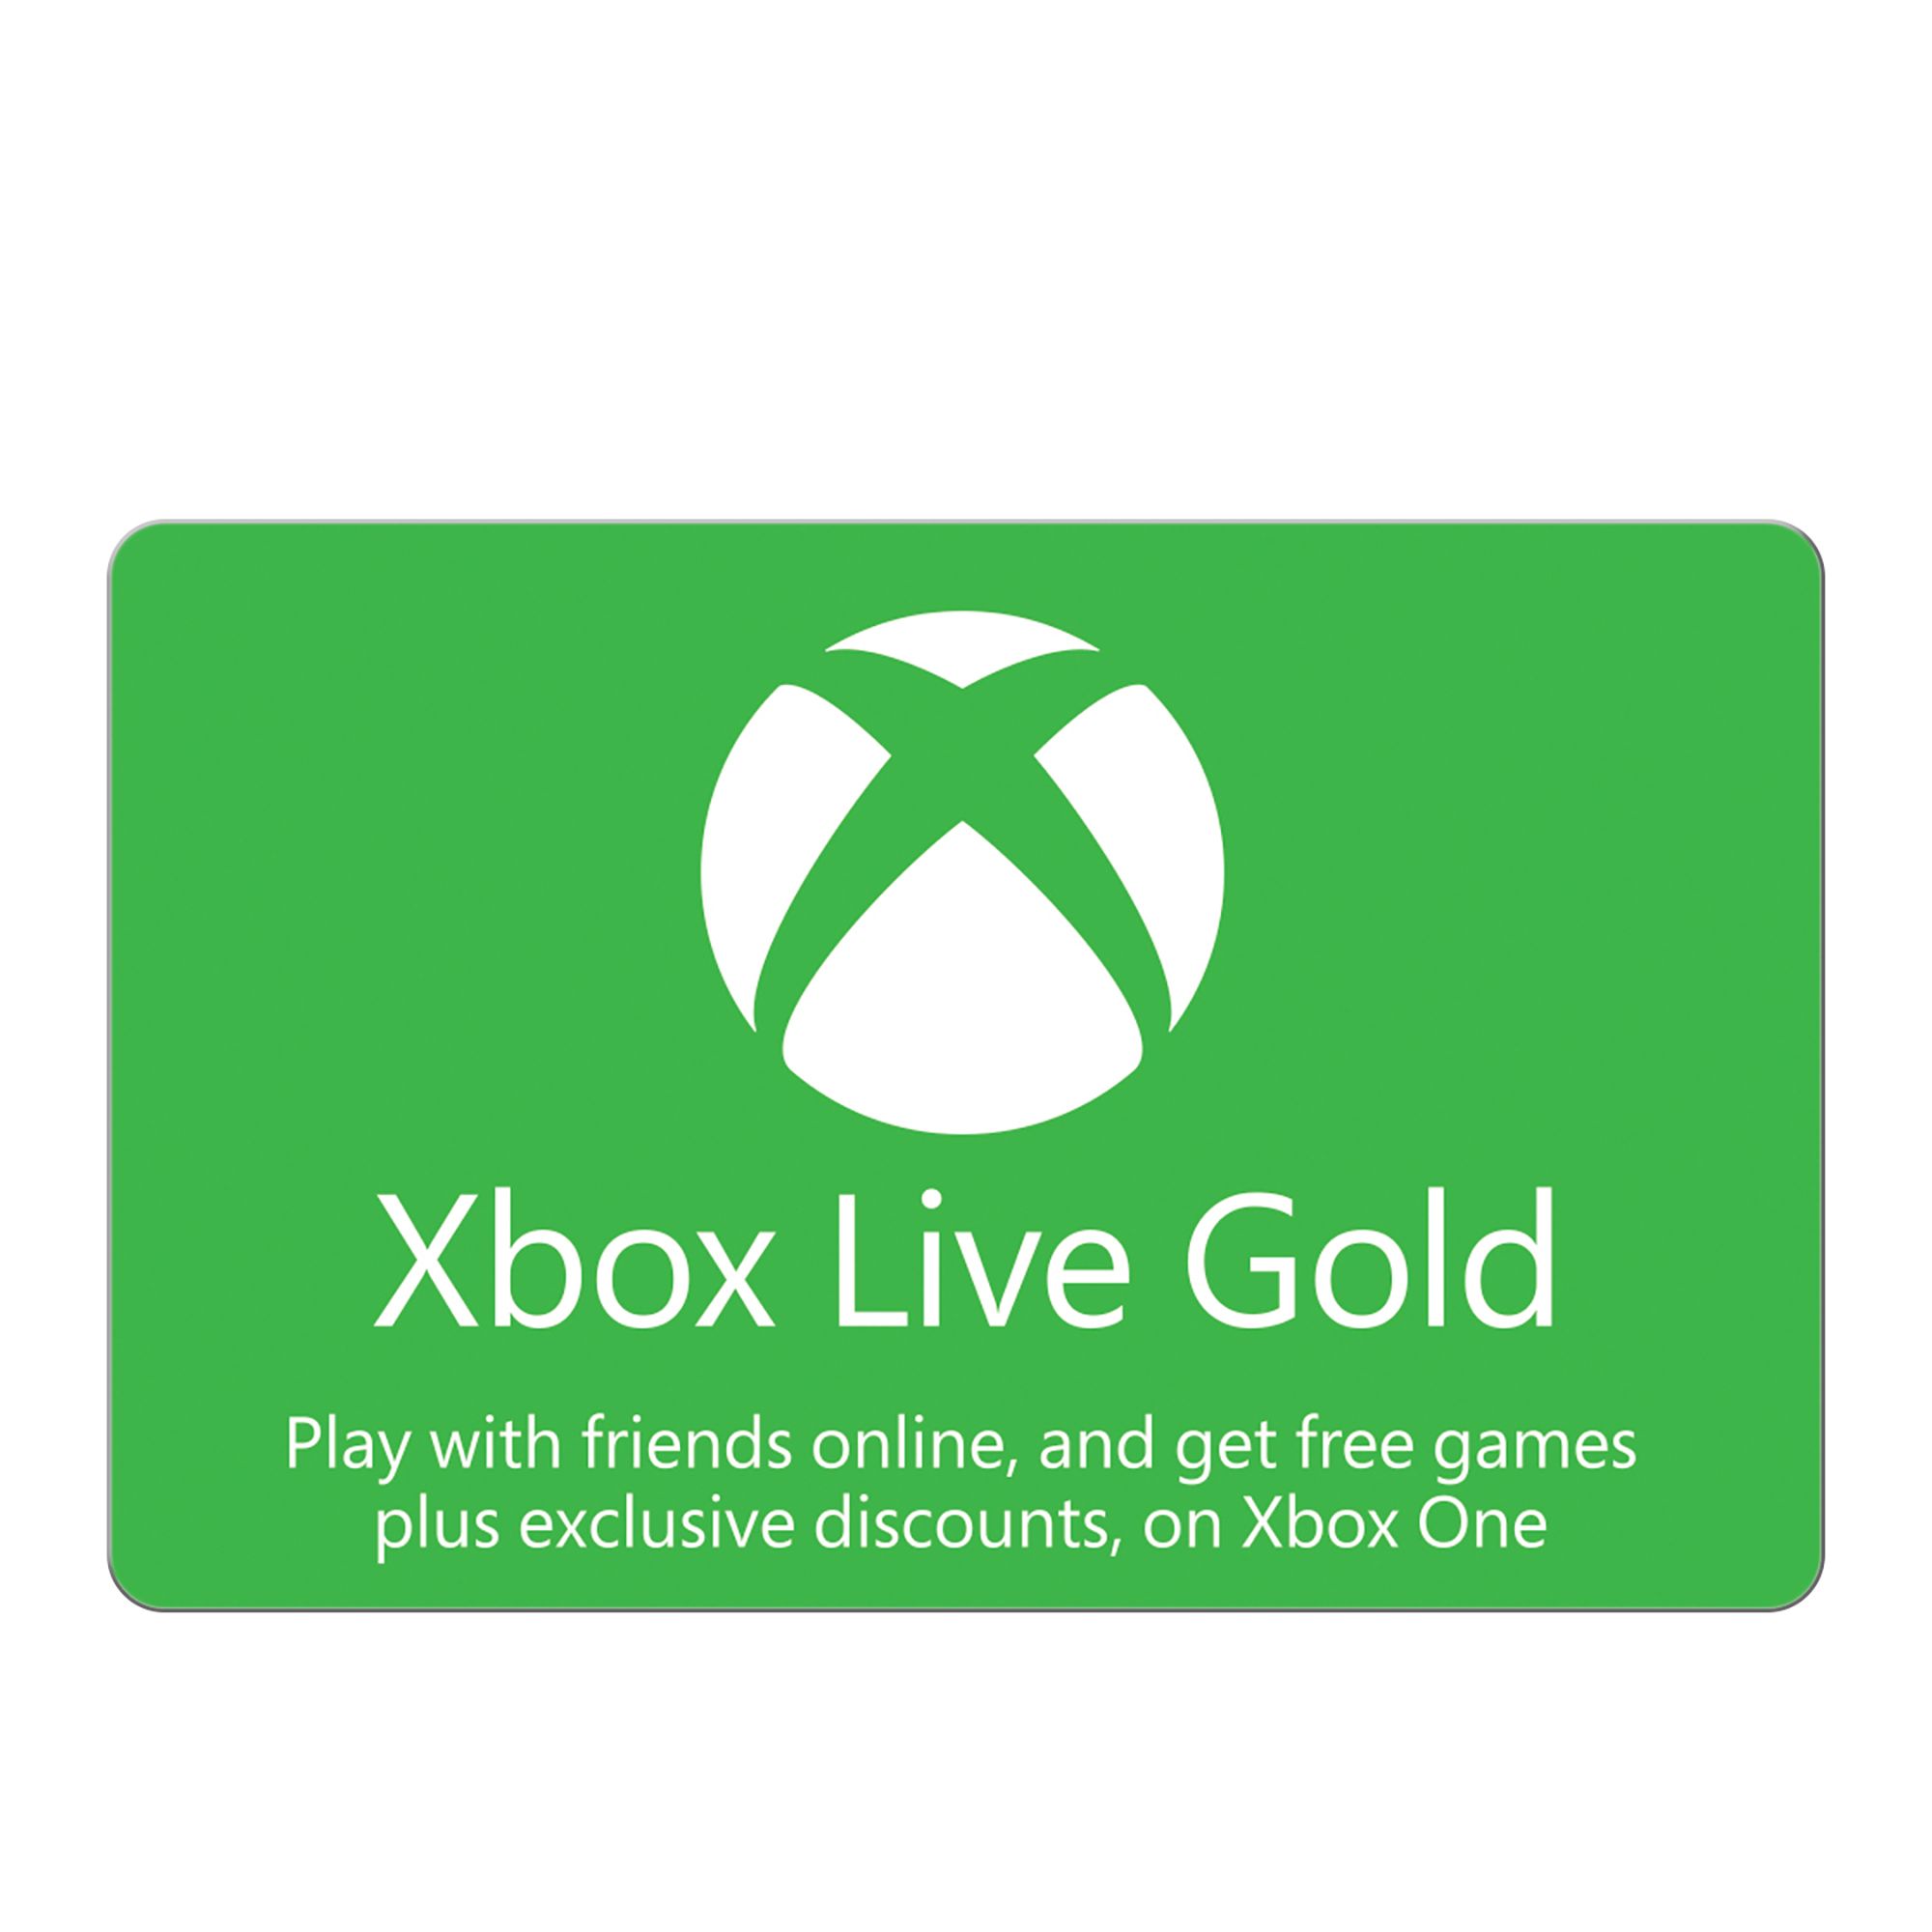 3 year xbox live gold